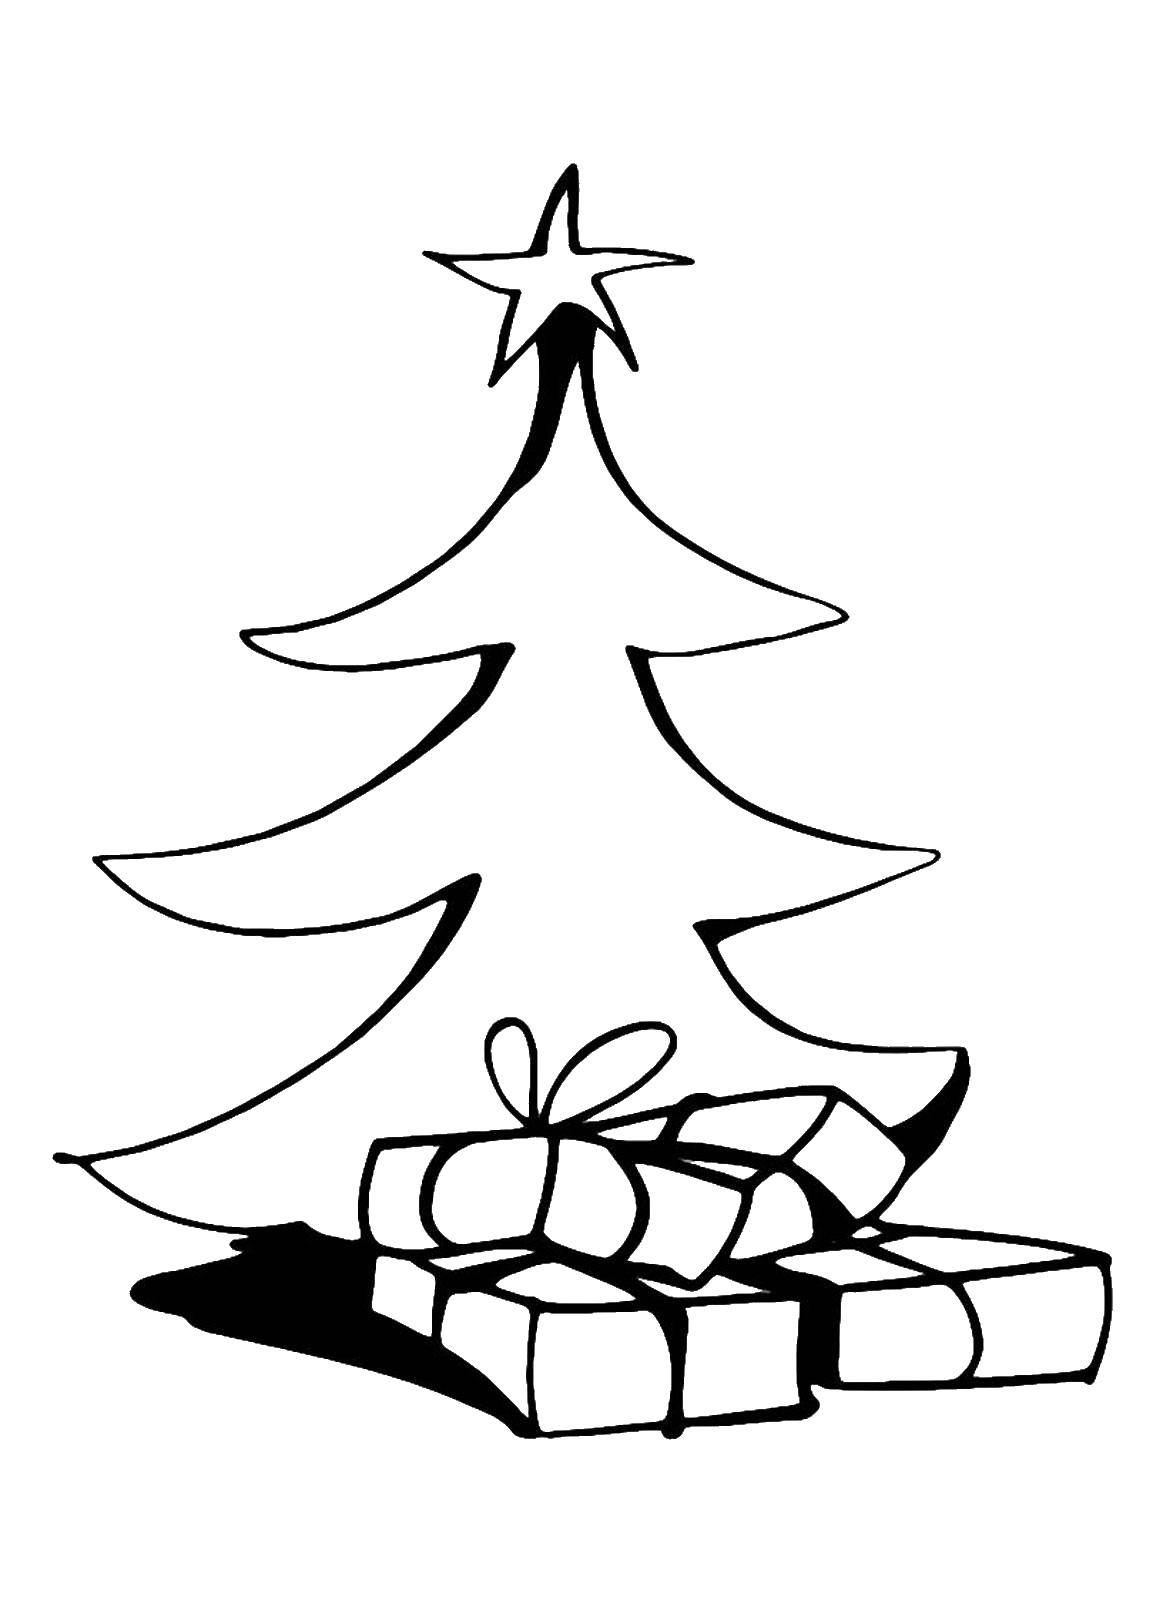 Coloring Large gifts under the tree. Category coloring Christmas tree. Tags:  New Year, tree, gifts, toys.